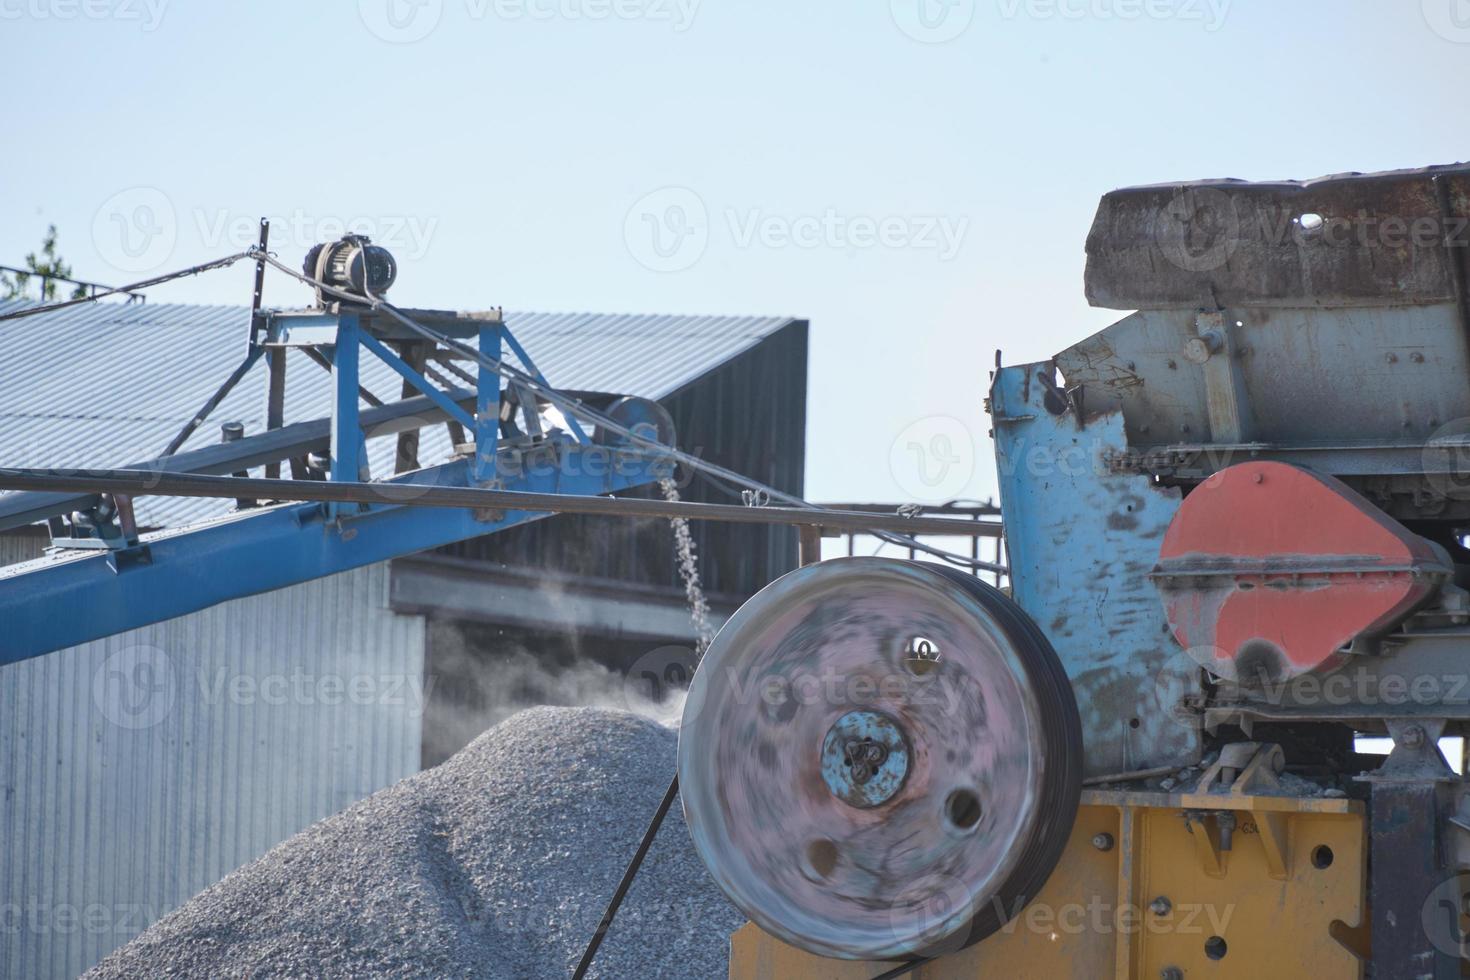 https://static.vecteezy.com/system/resources/previews/013/296/003/non_2x/industrial-conveyor-belt-transports-building-material-small-crushed-stone-photo.jpg